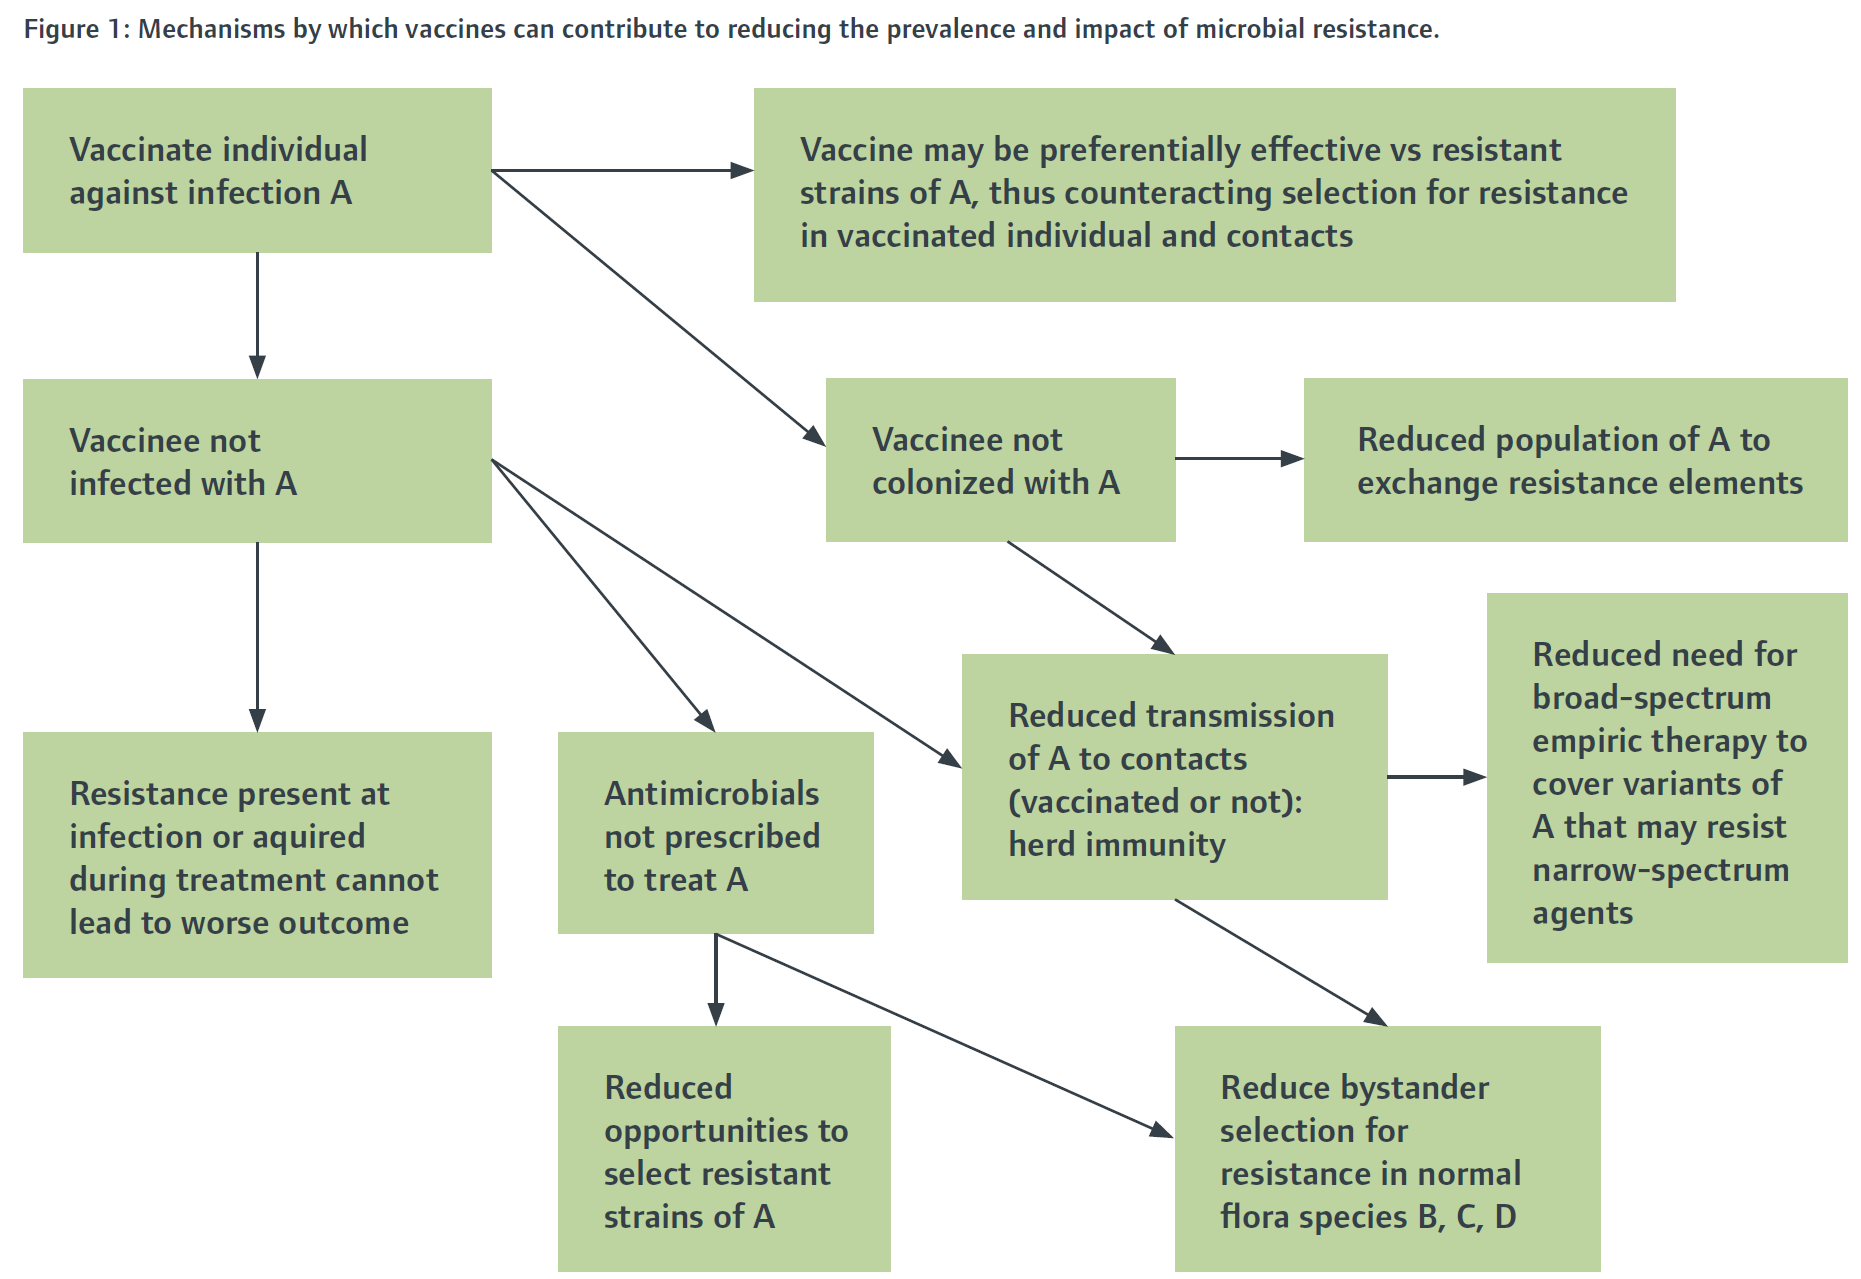 Flowchart showing how vaccines can assist with reducing antibiotic use in animals